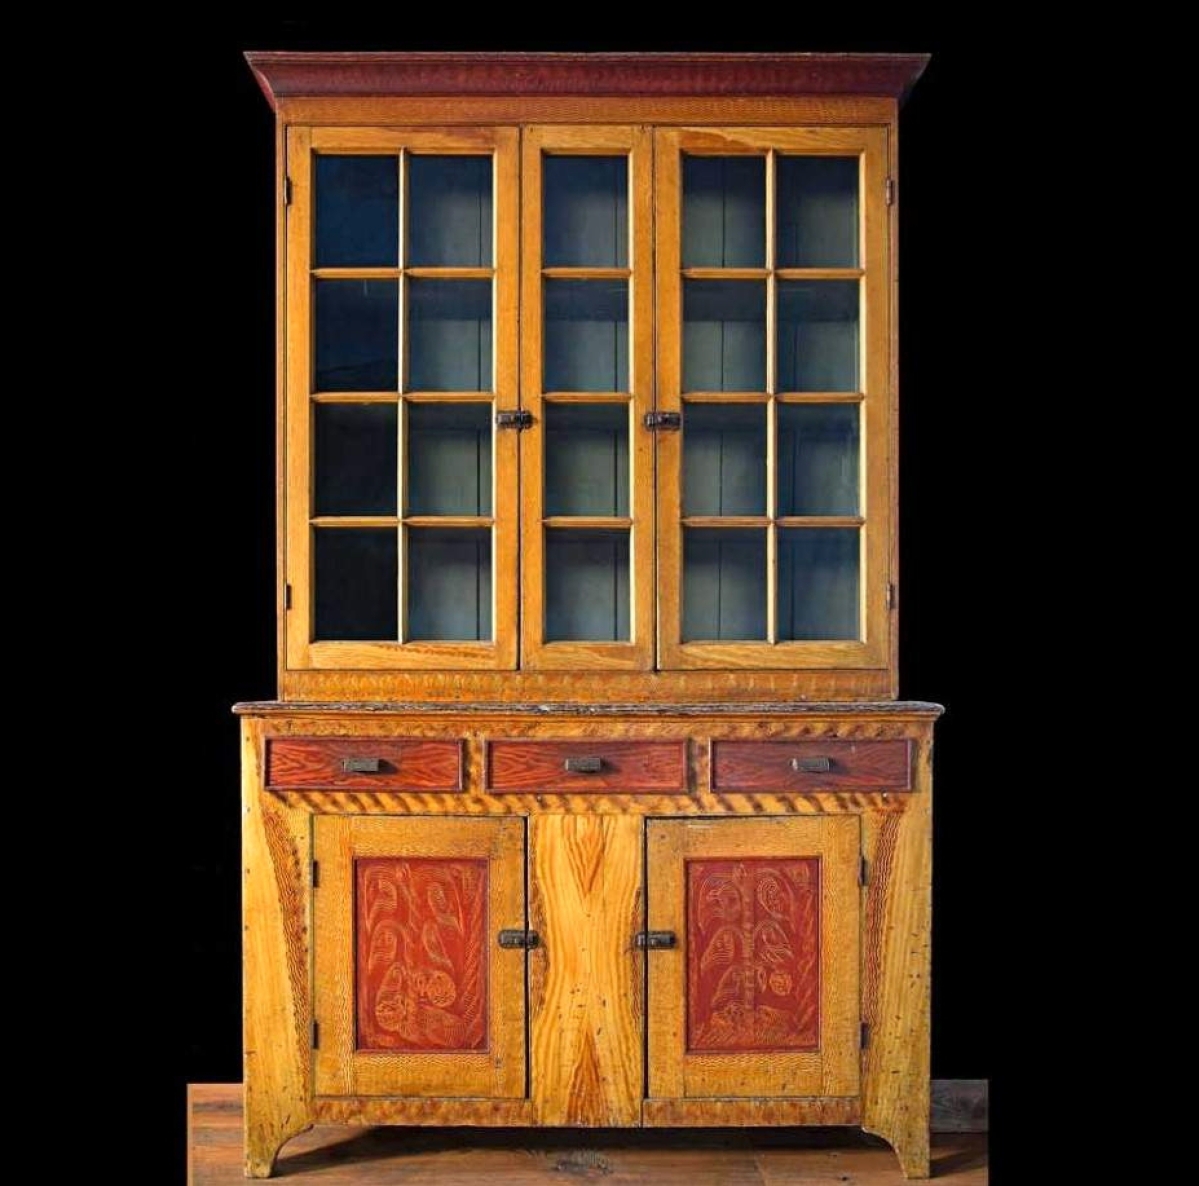 Early Nineteenth Century paint decorated cupboard ($40/60,000).